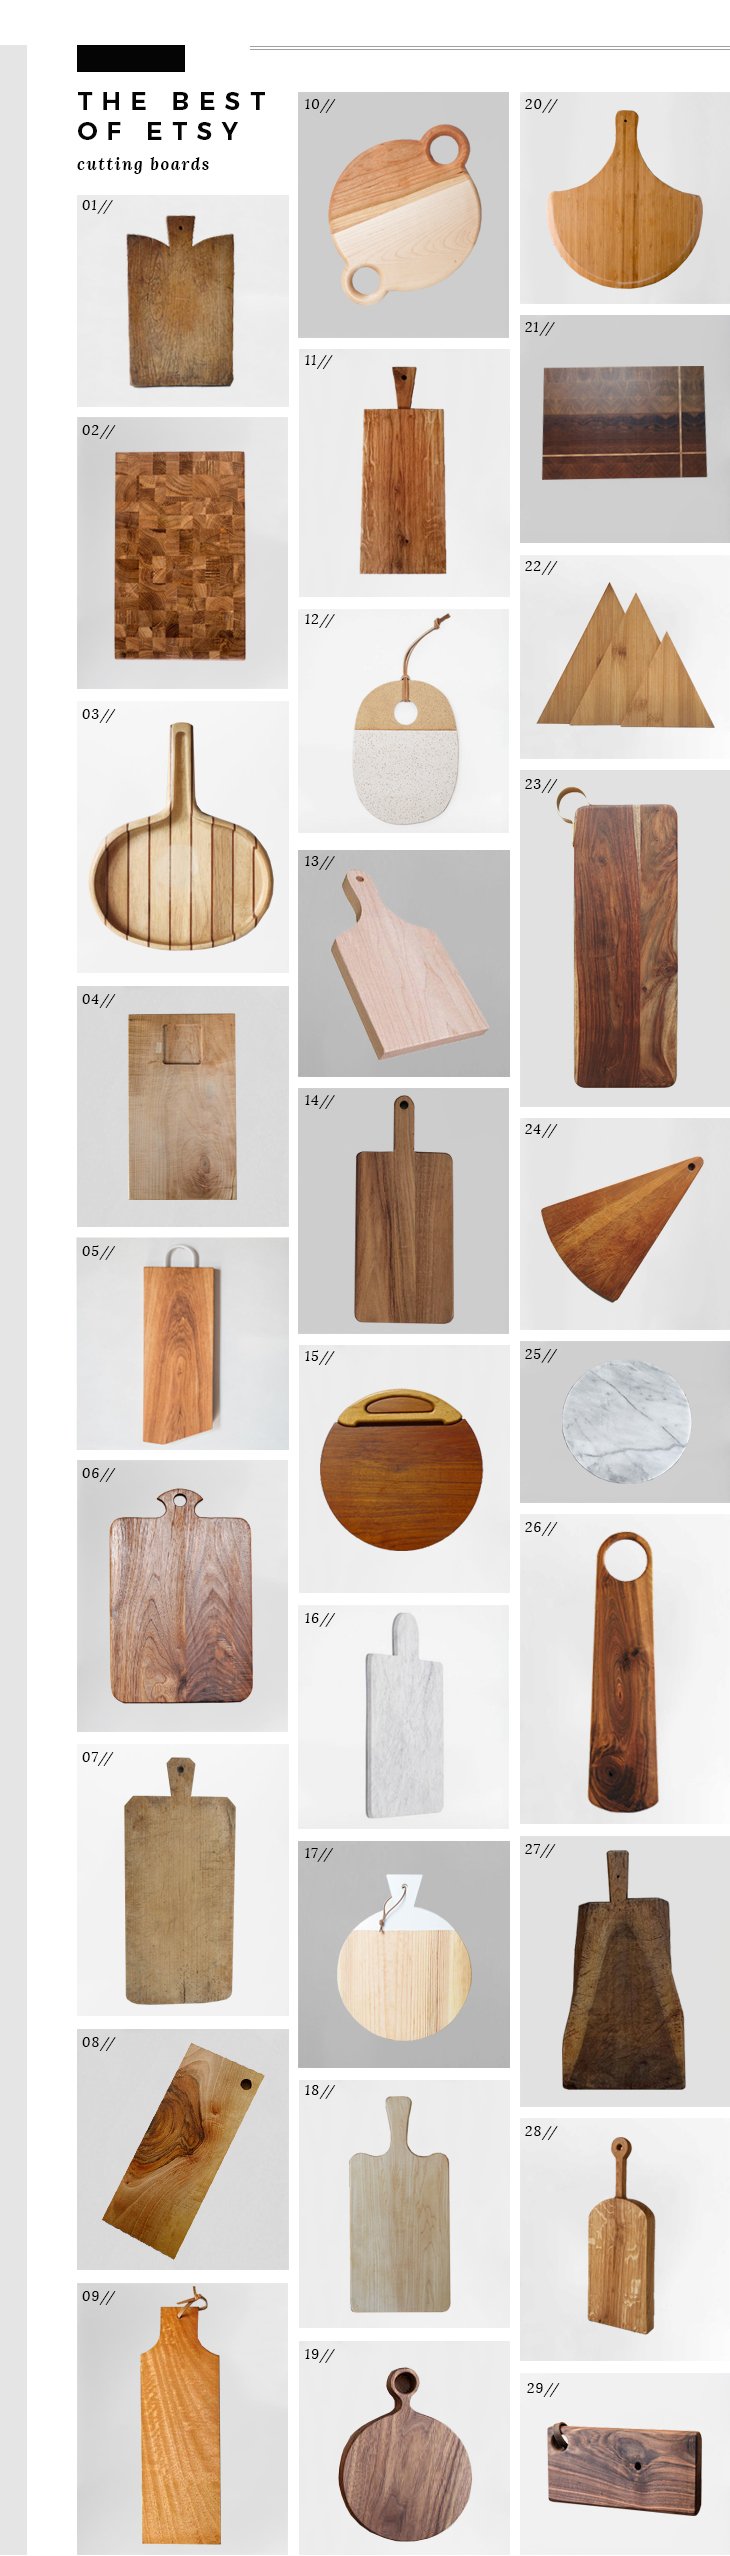 Best of Etsy - Cutting Boards